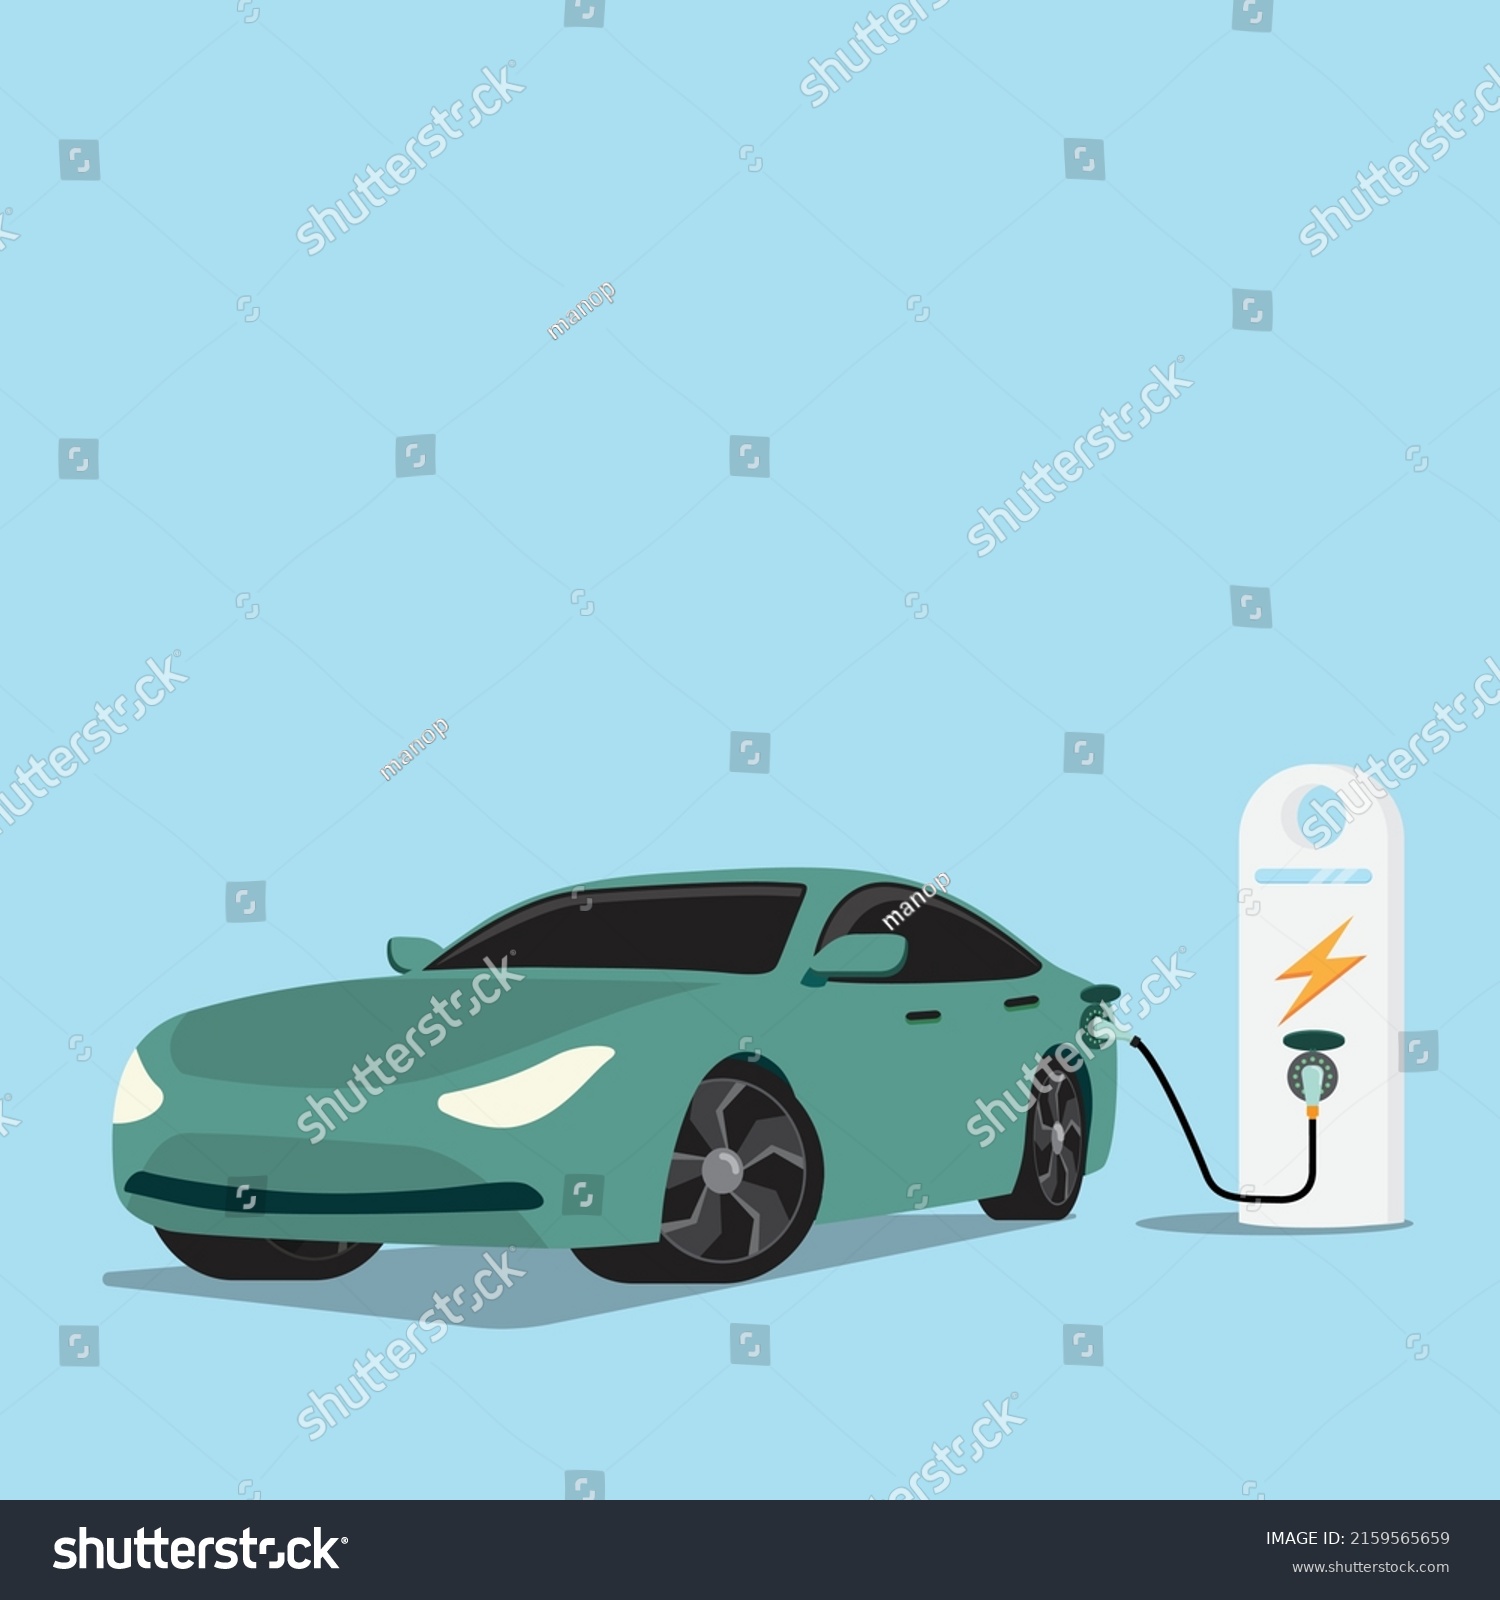 Electric Vehicle Ev Car Recharge Station Stock Vector (Royalty Free ...